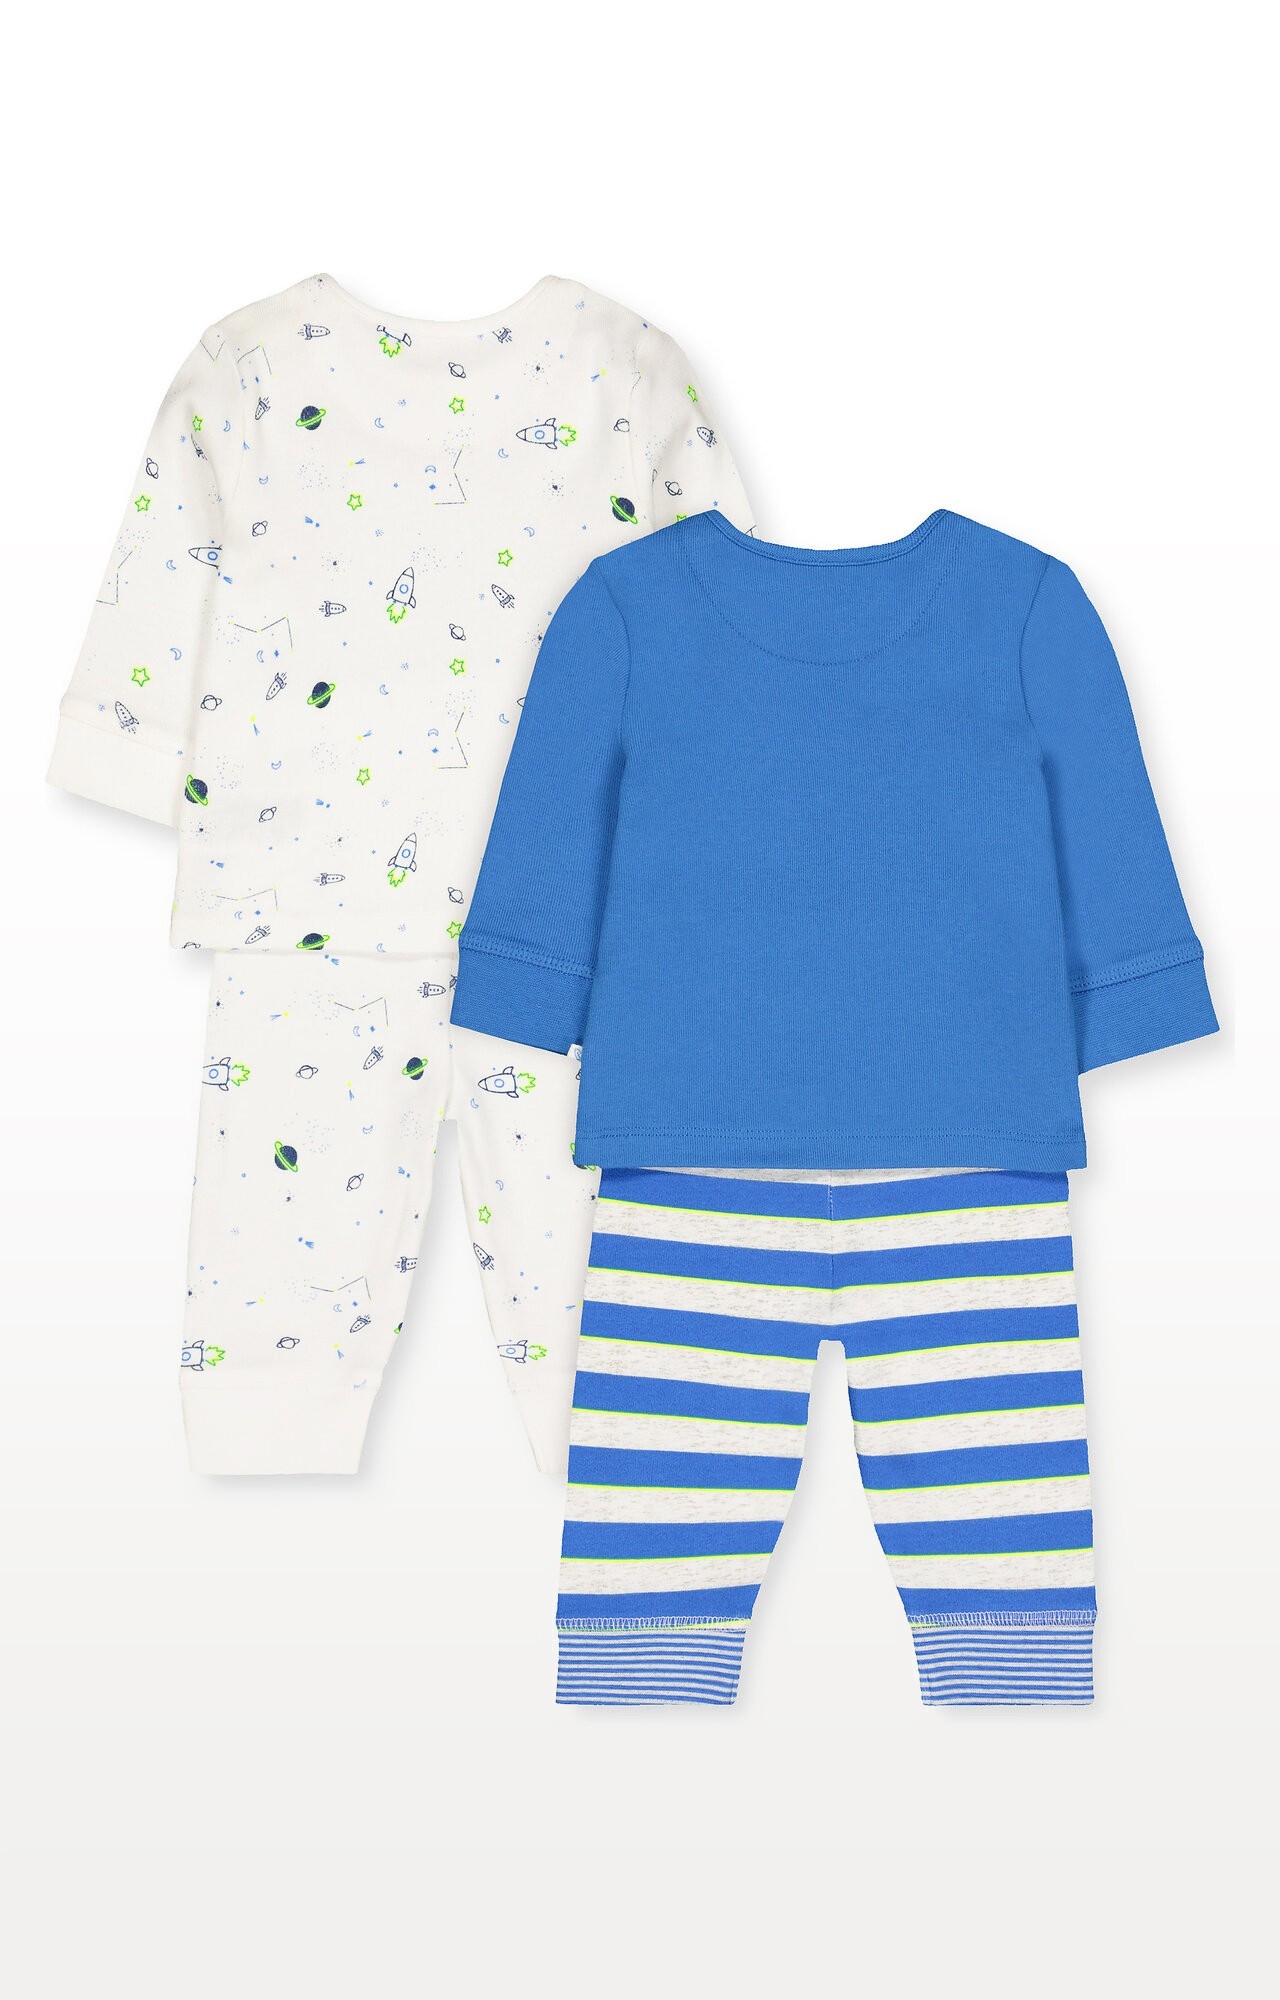 Mothercare | Little Space Pyjamas - Pack of 2 1